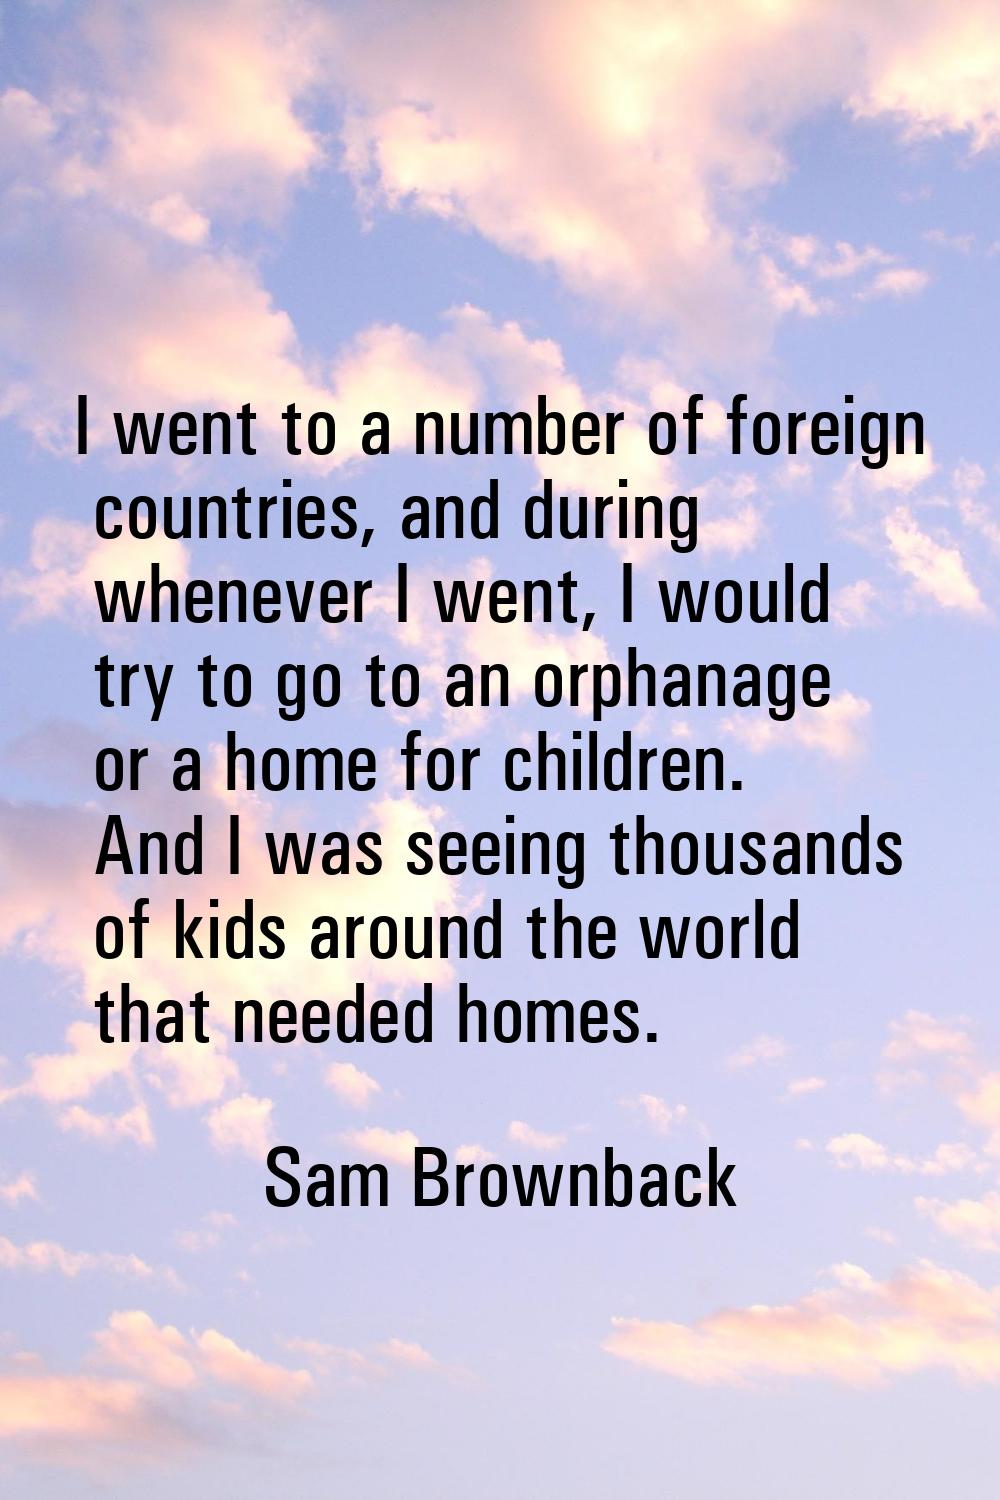 I went to a number of foreign countries, and during whenever I went, I would try to go to an orphan